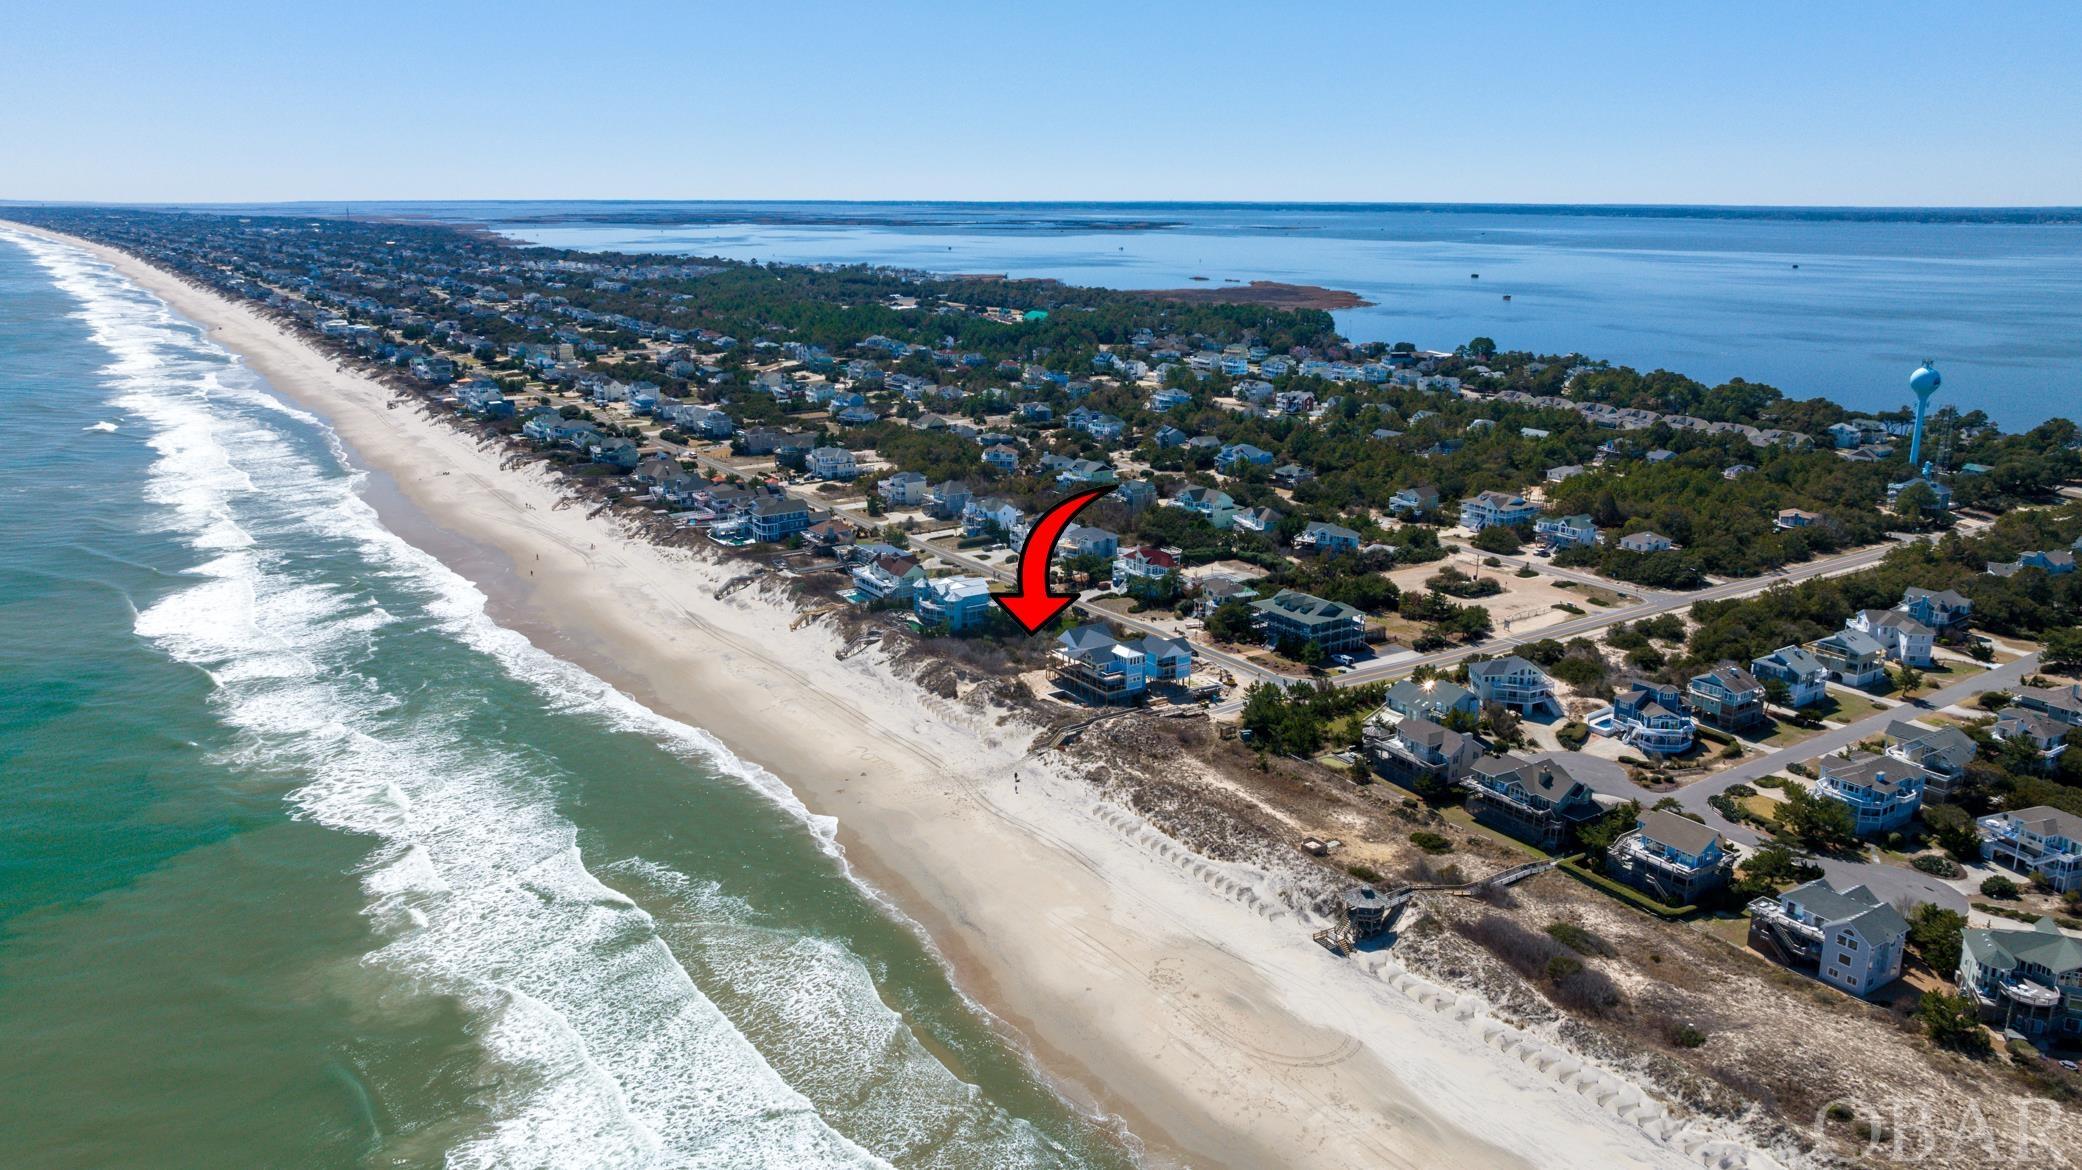 Beautiful Oceanfront Lot ready for you to build your dream vacation home!  This lot has 100 ft frontage on the Ocean and is one if the few remaining oceanfront lots to build on in the community! Conveniently situated in Whalehead Beach this property has easy access to amenities and conveniences in Corolla as well as the breathtaking ocean views!